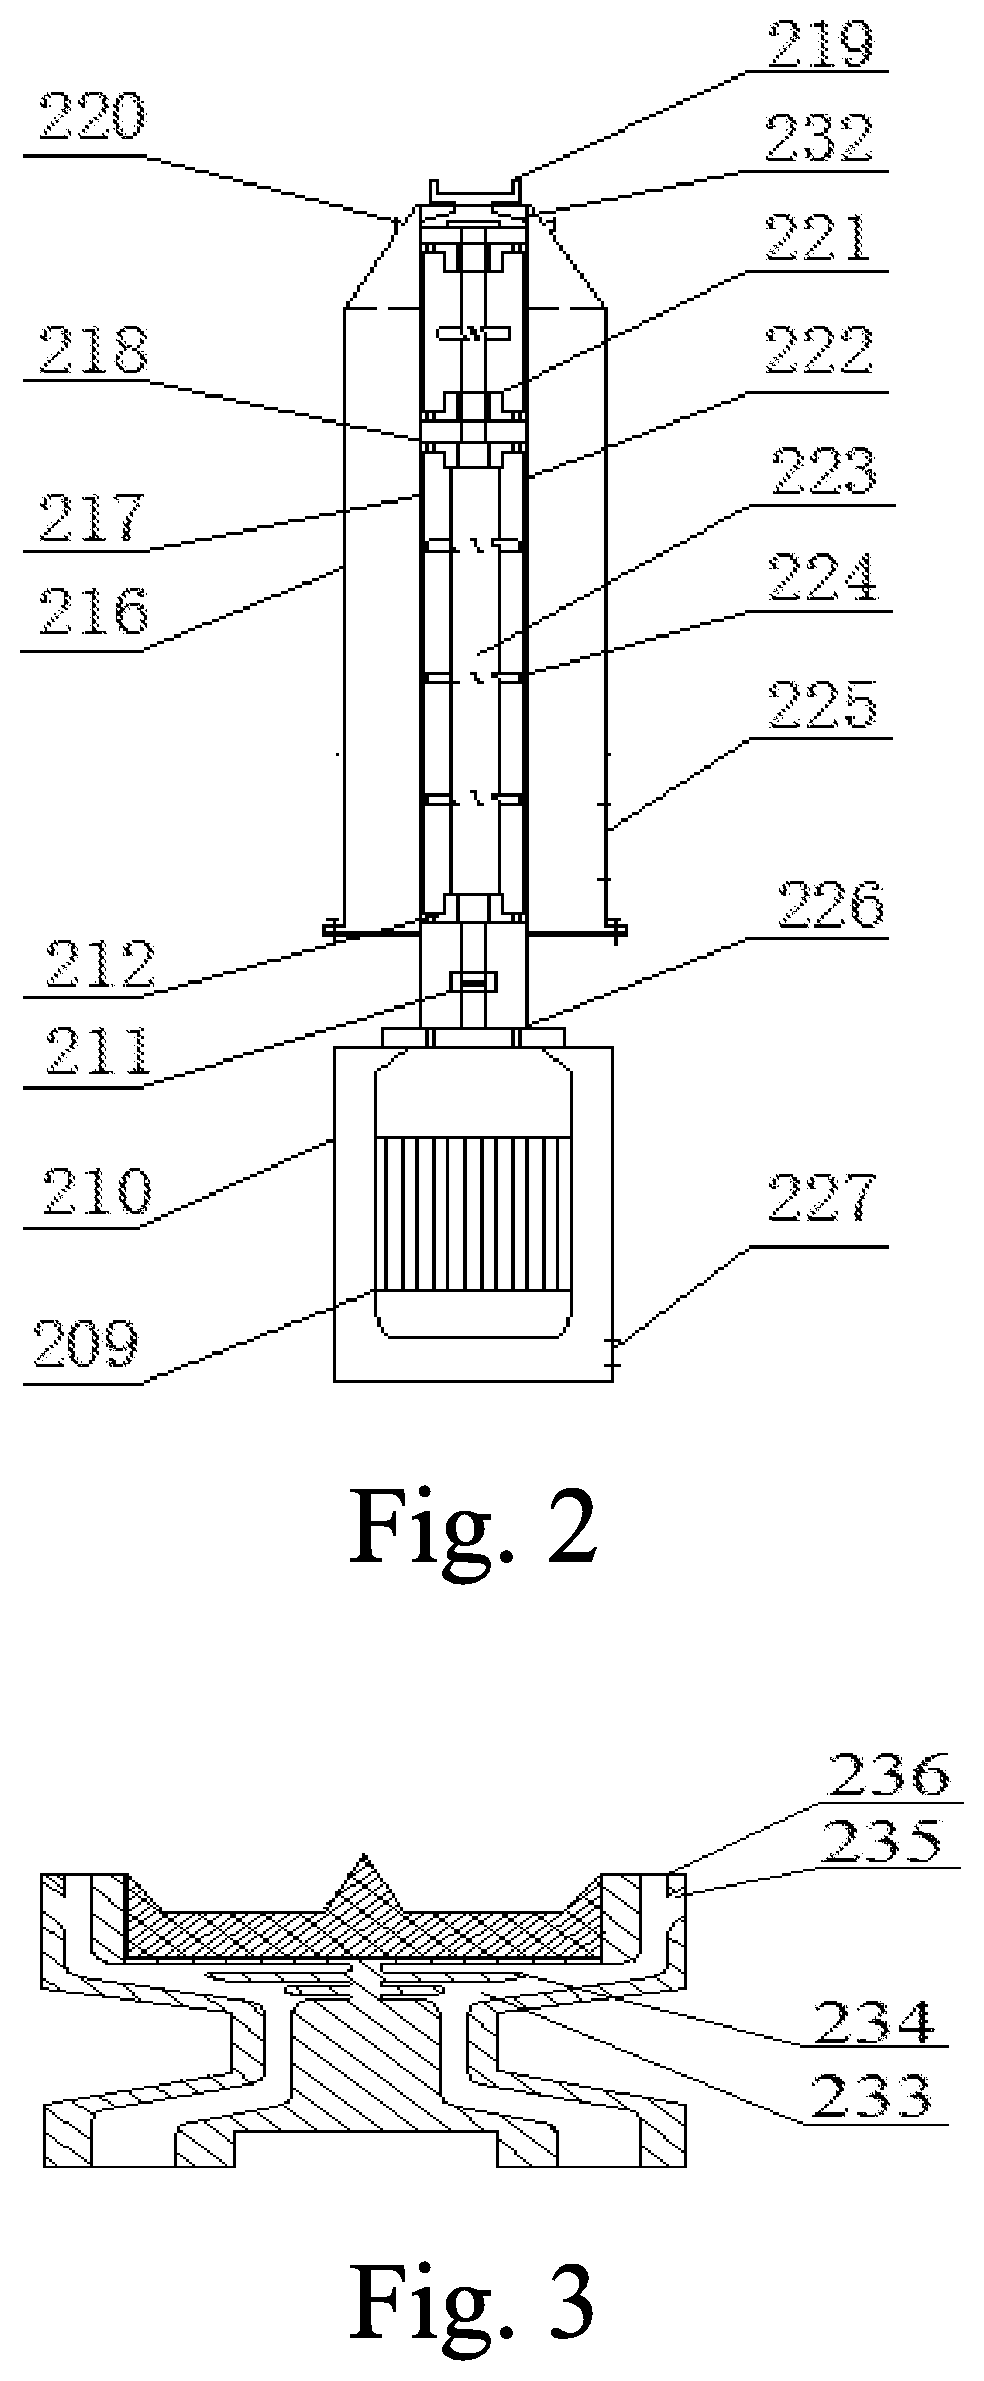 Method for controlling particle size of dry centrifugal granulated slag particles from liquid slag